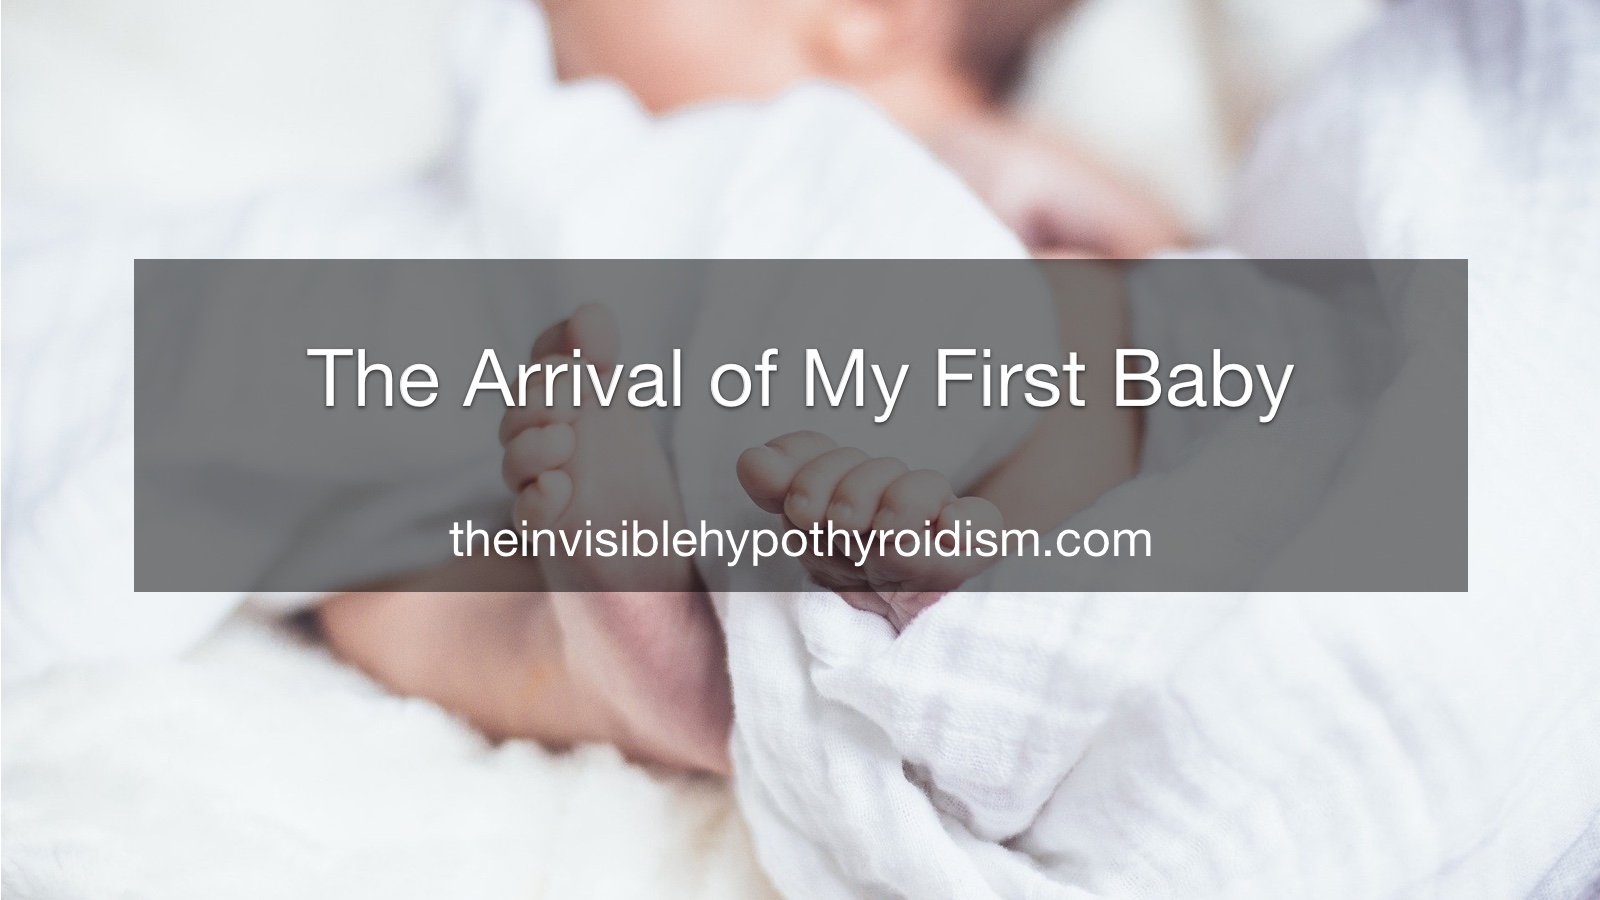 The Arrival of My First Baby